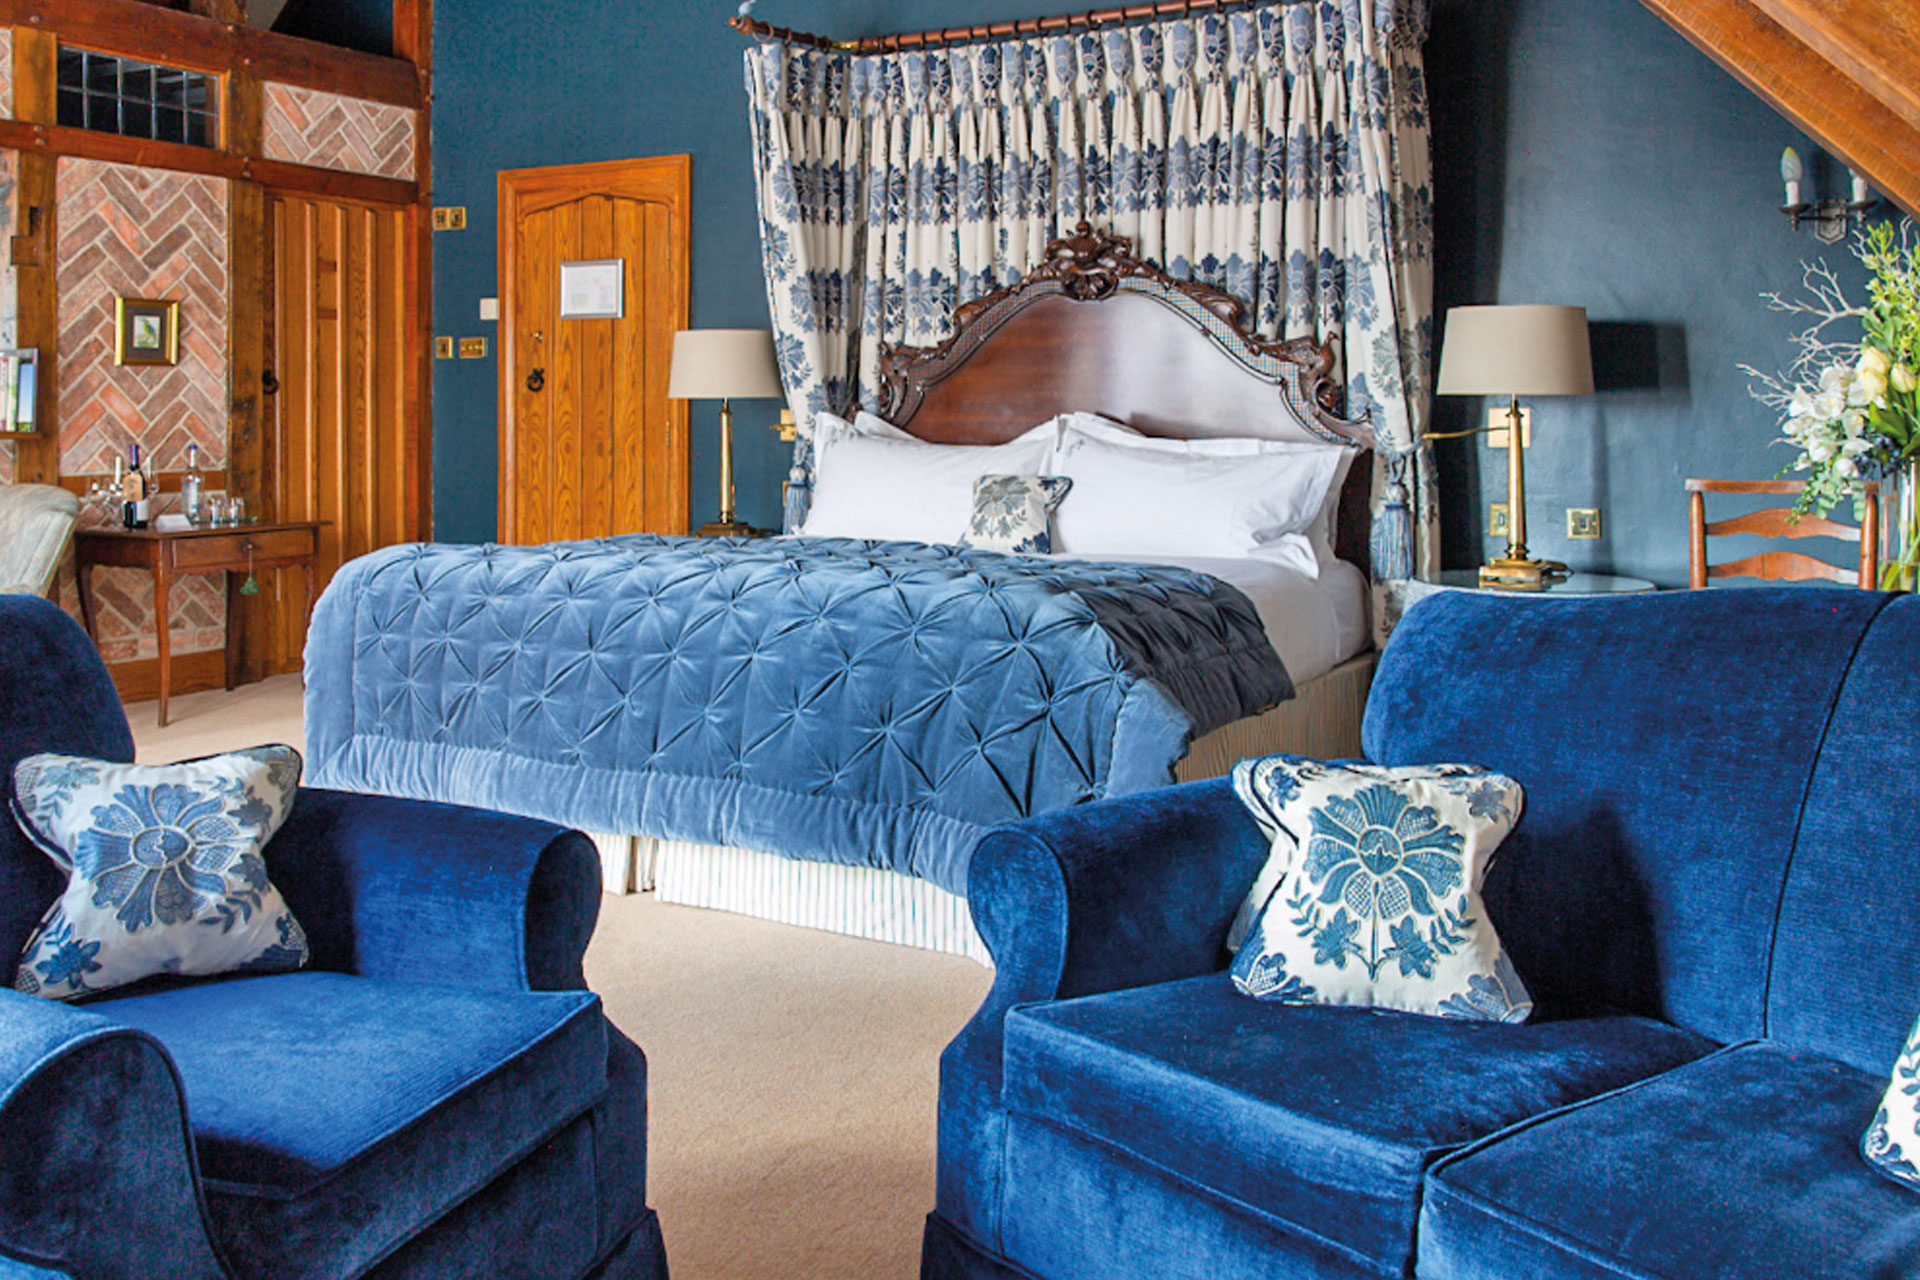 The Priory Hotel bedroom - blue bedroom